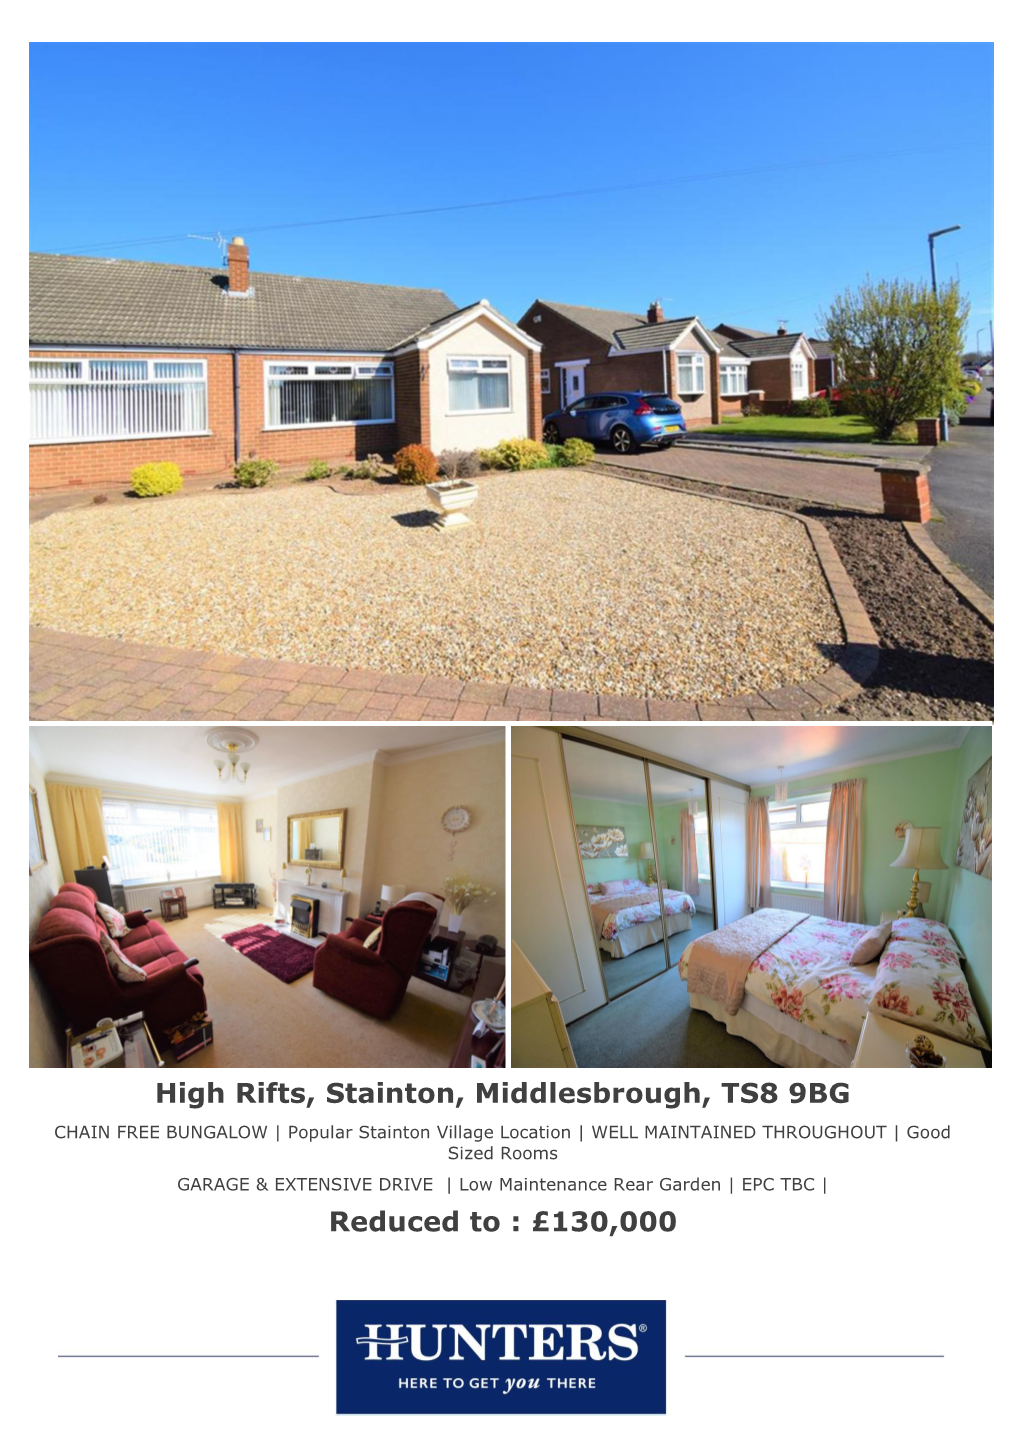 High Rifts, Stainton, Middlesbrough, TS8 9BG Reduced to : £130,000